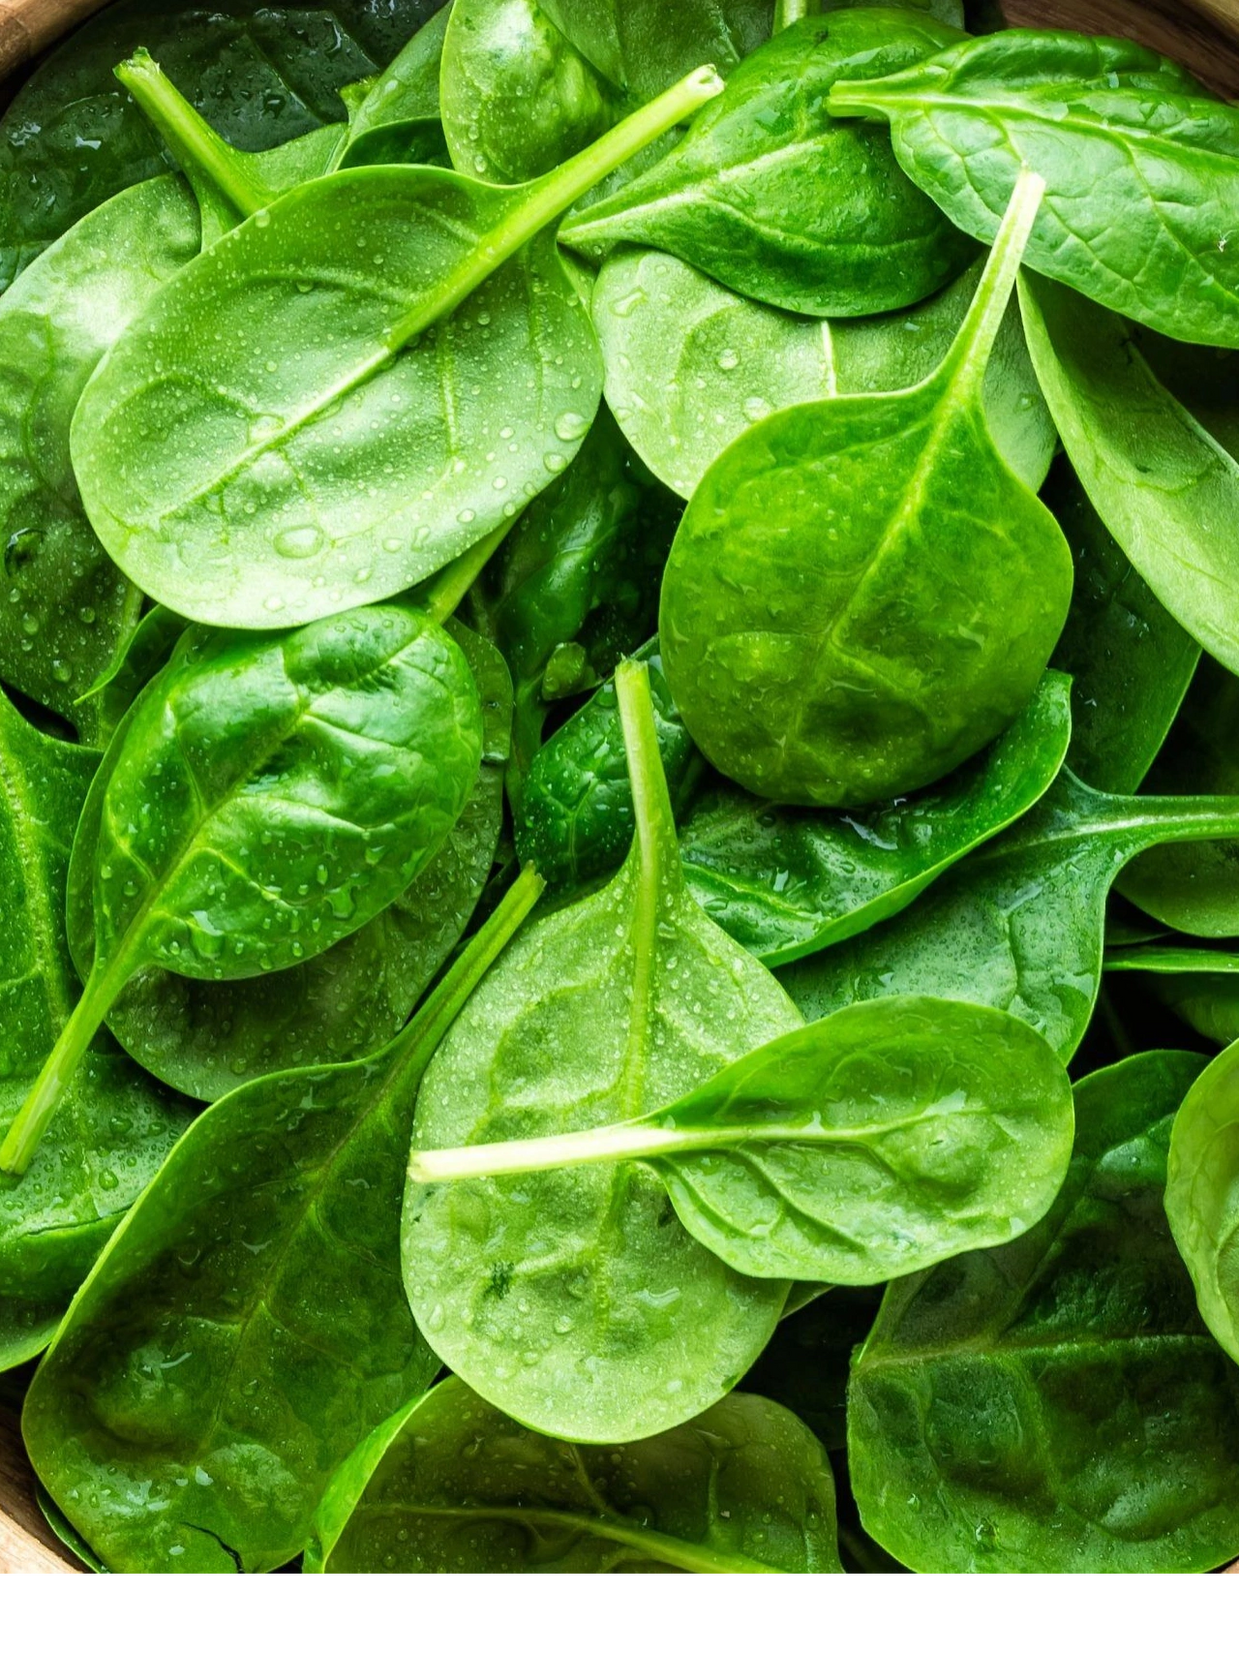 Spinach - it’s a super food and enables a super you!